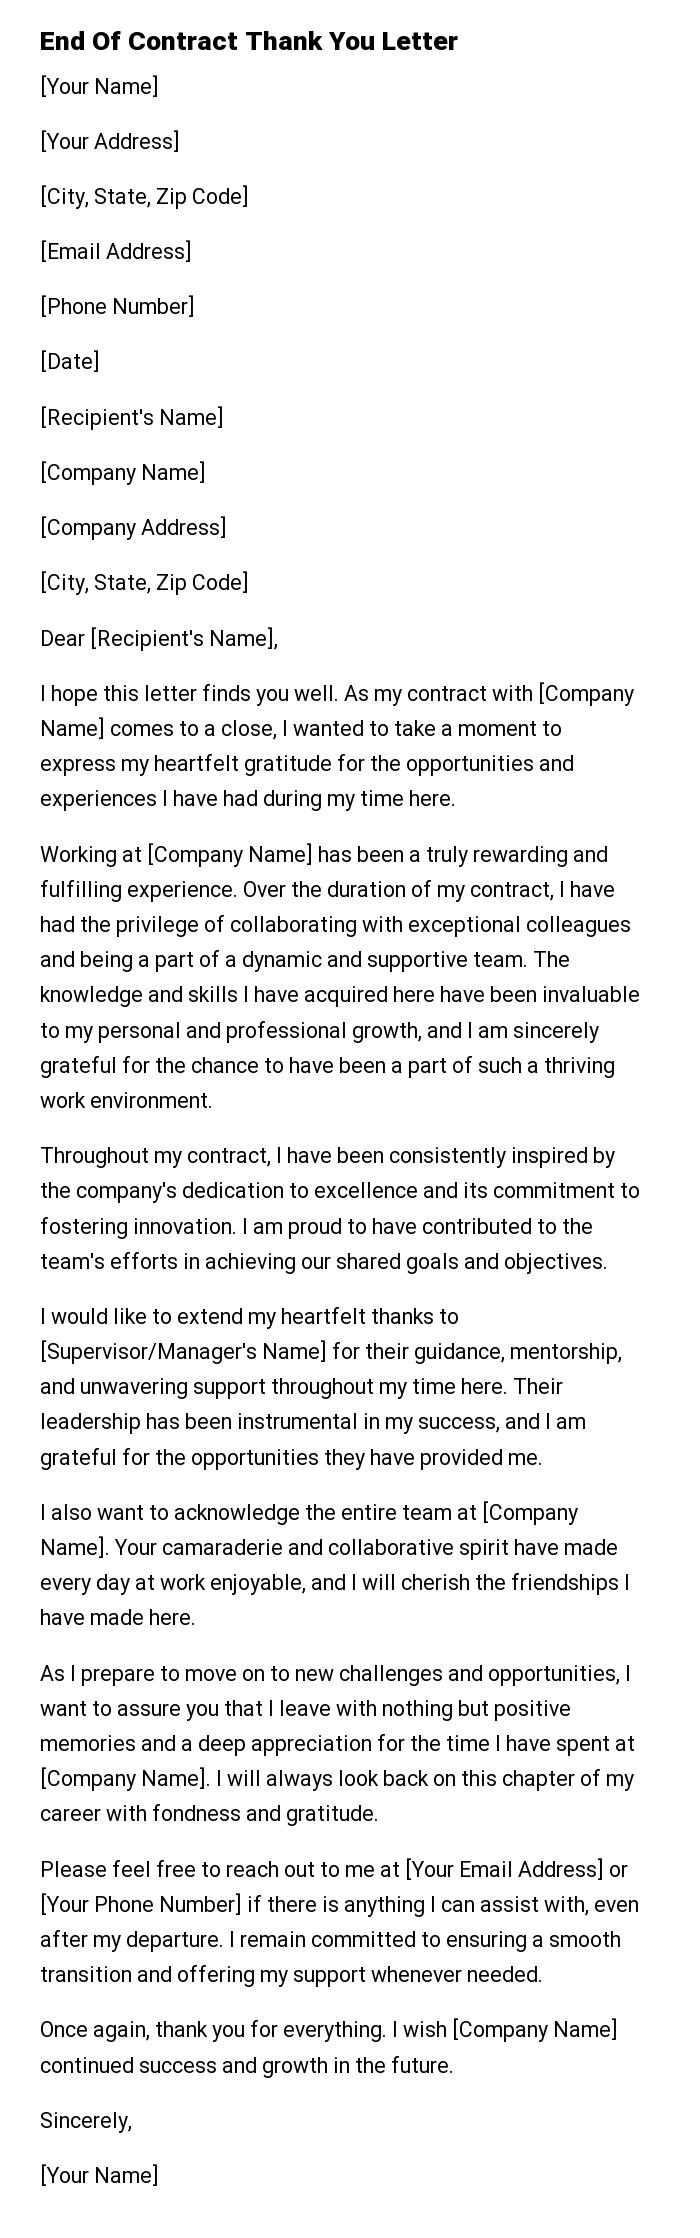 End Of Contract Thank You Letter